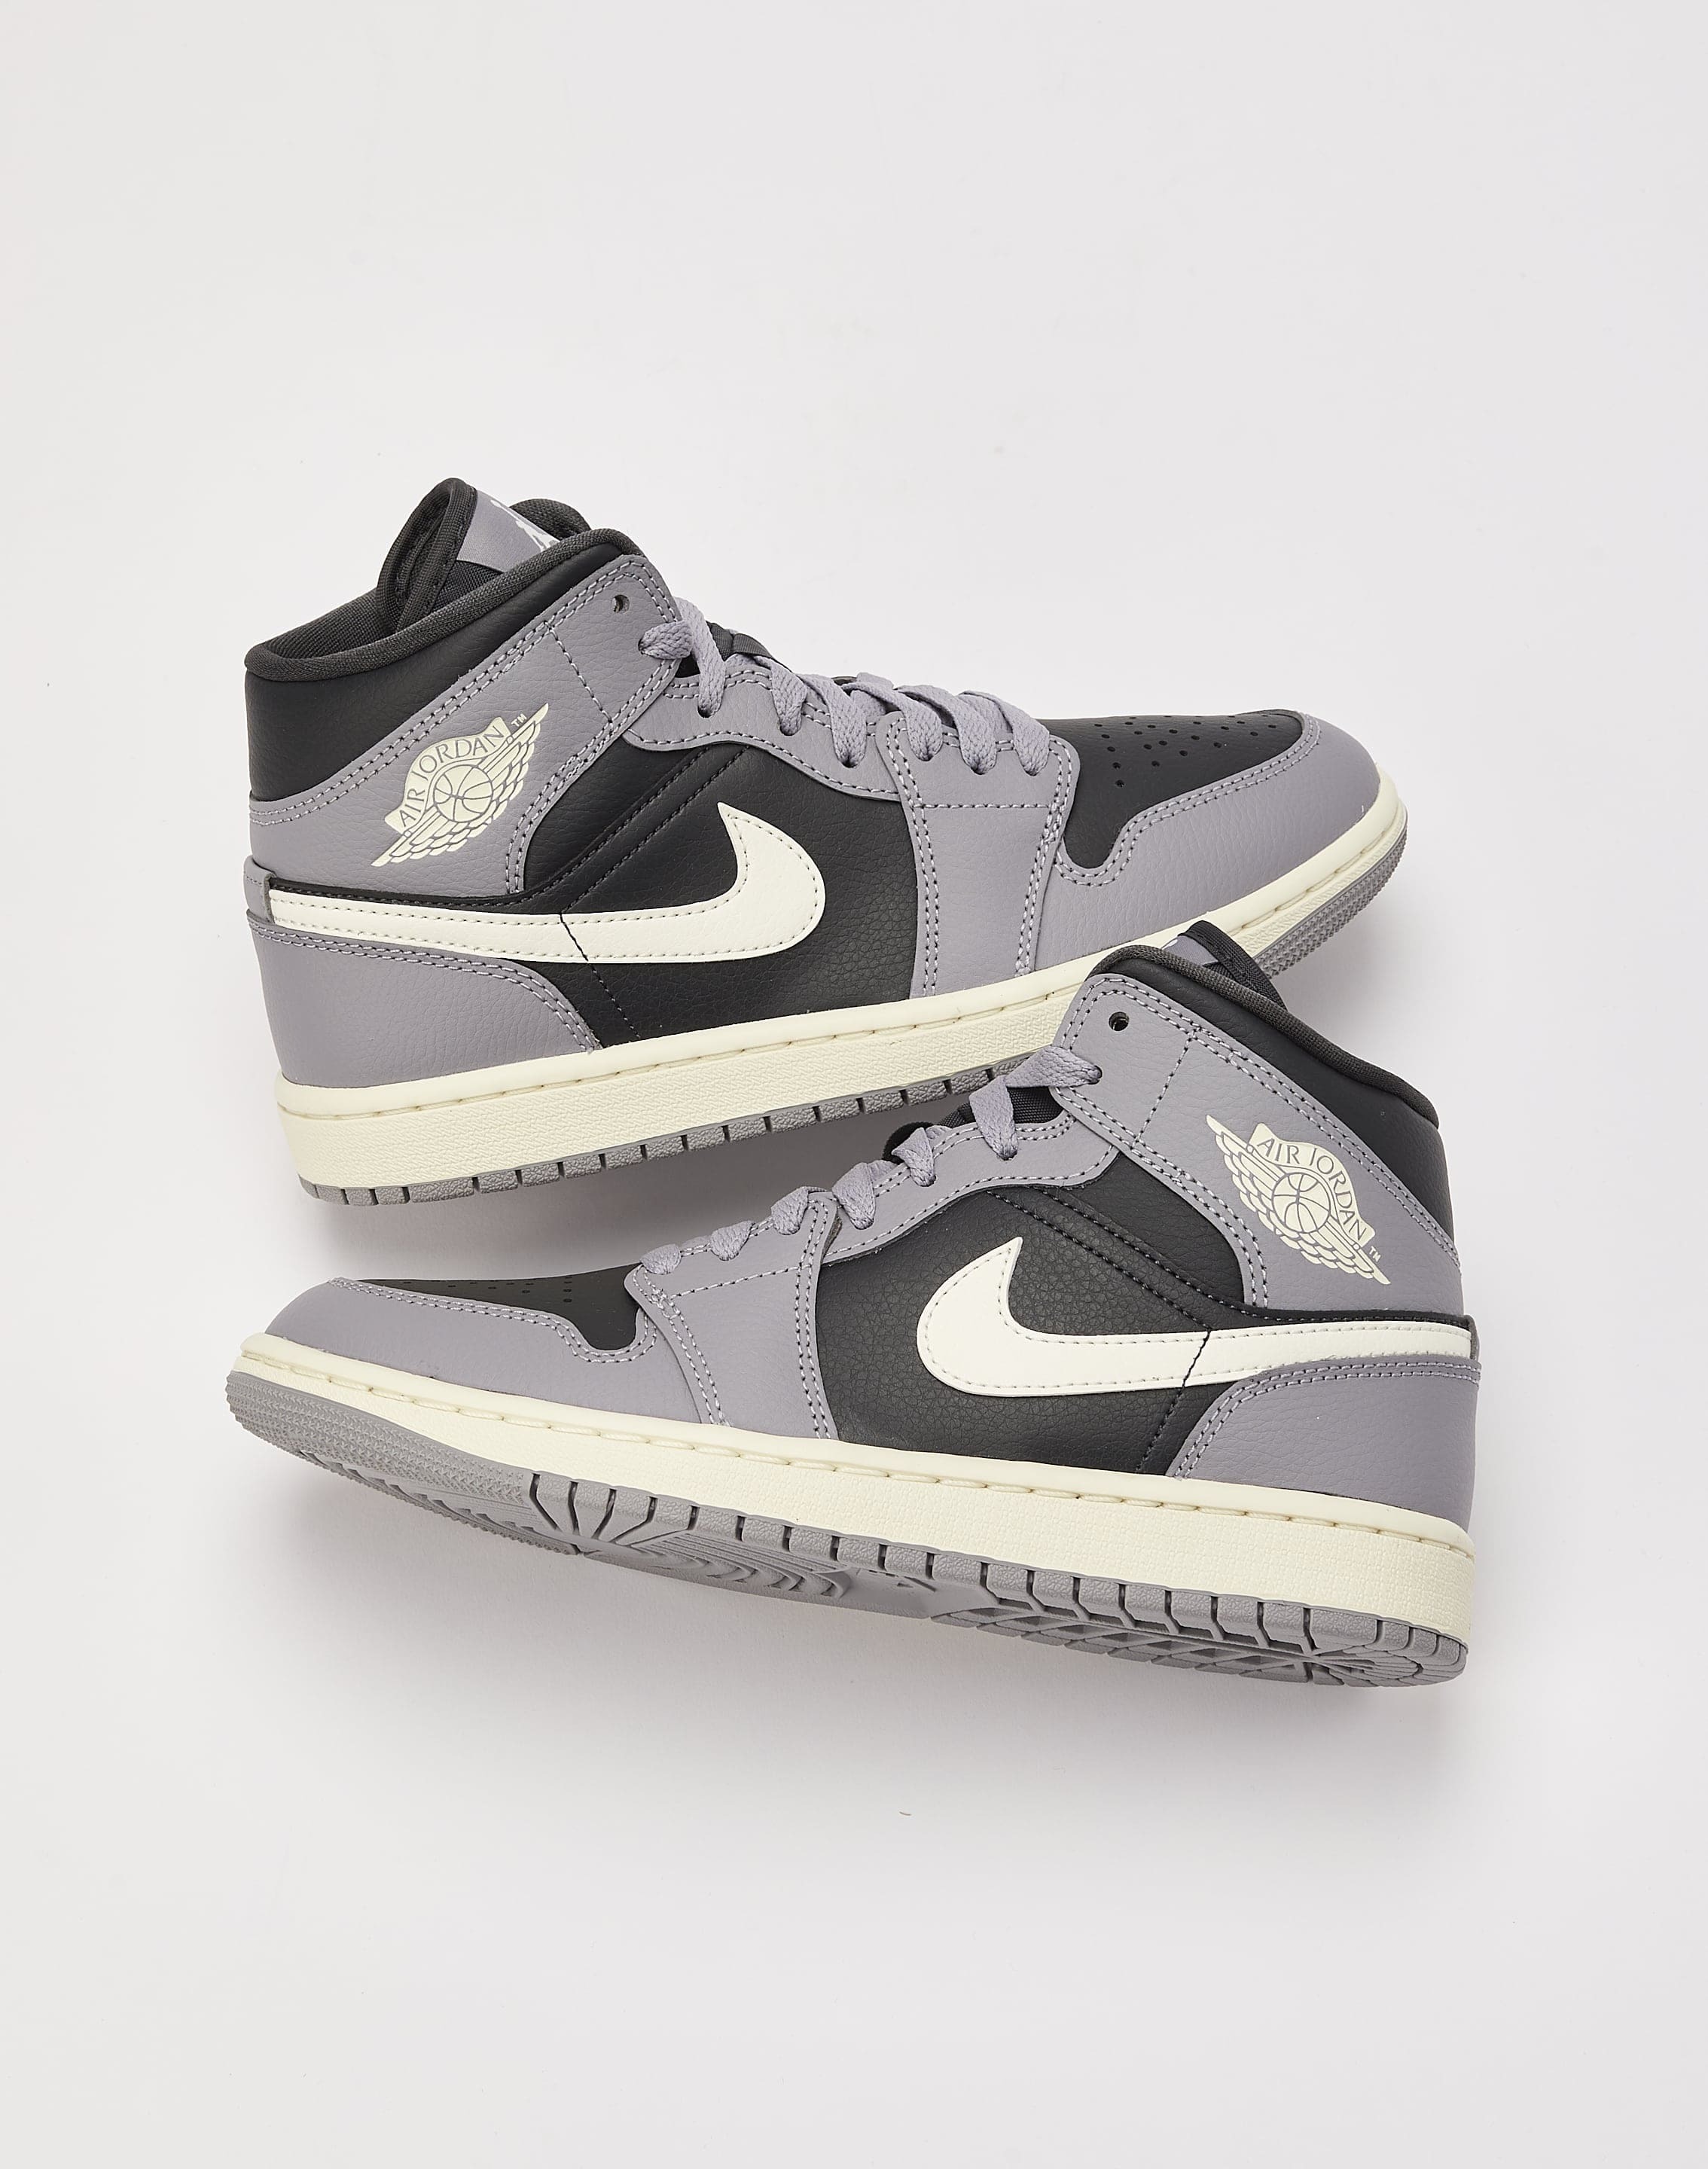 Women’s Air Jordan 1 Mid “Cement Grey” is Now Available on Nike US